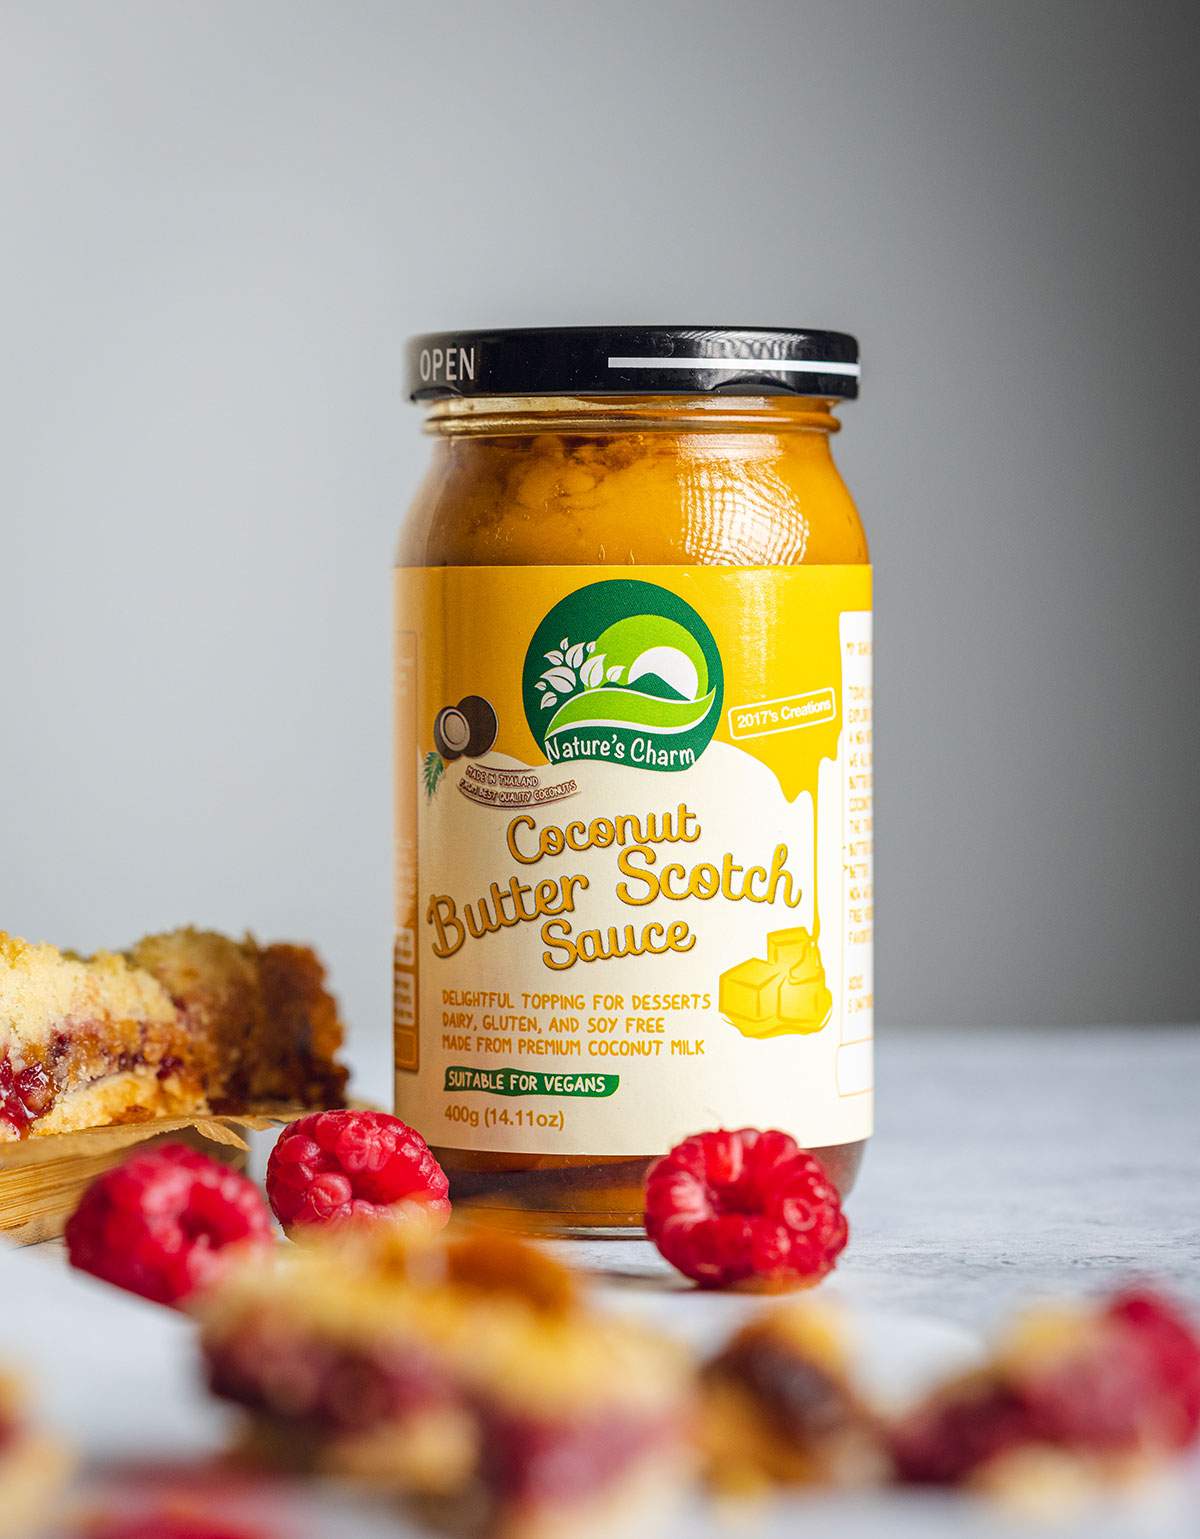 A jar of Nature's Charm Coconut Butterscotch Sauce is sitting on a table next to crumble bars and fresh raspberries.